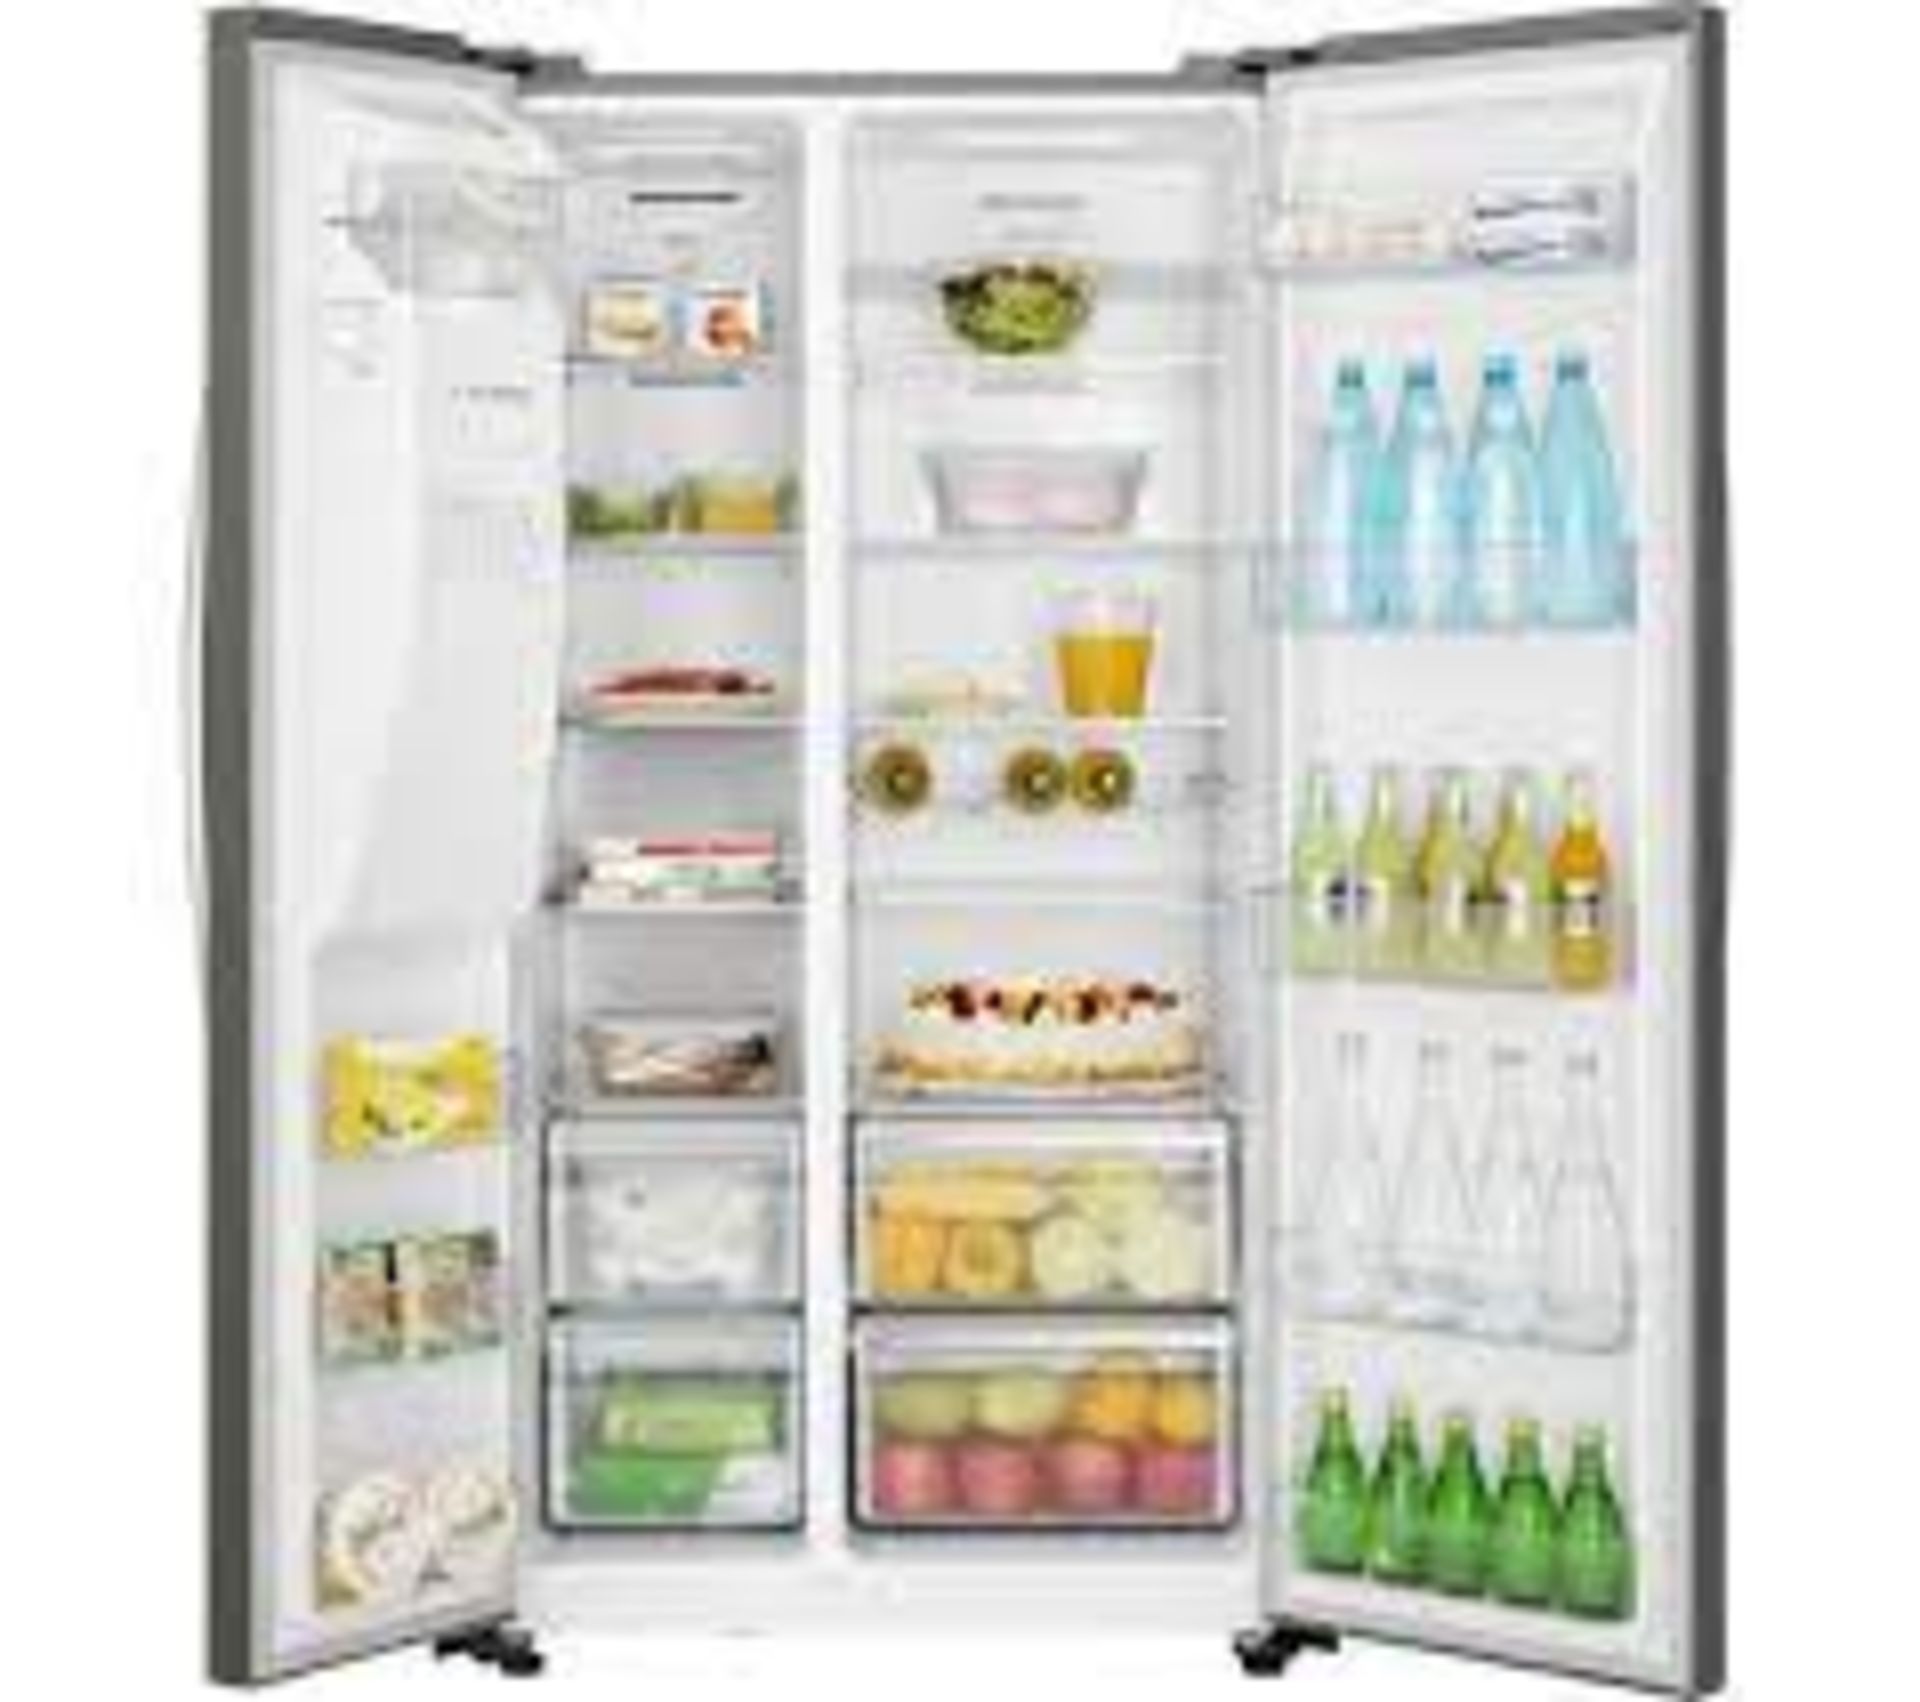 1 x Kenwood KSBSDiX20 Stainless Steel American Style Fridge Freezer With Water and Ice Dispenser - Image 2 of 8